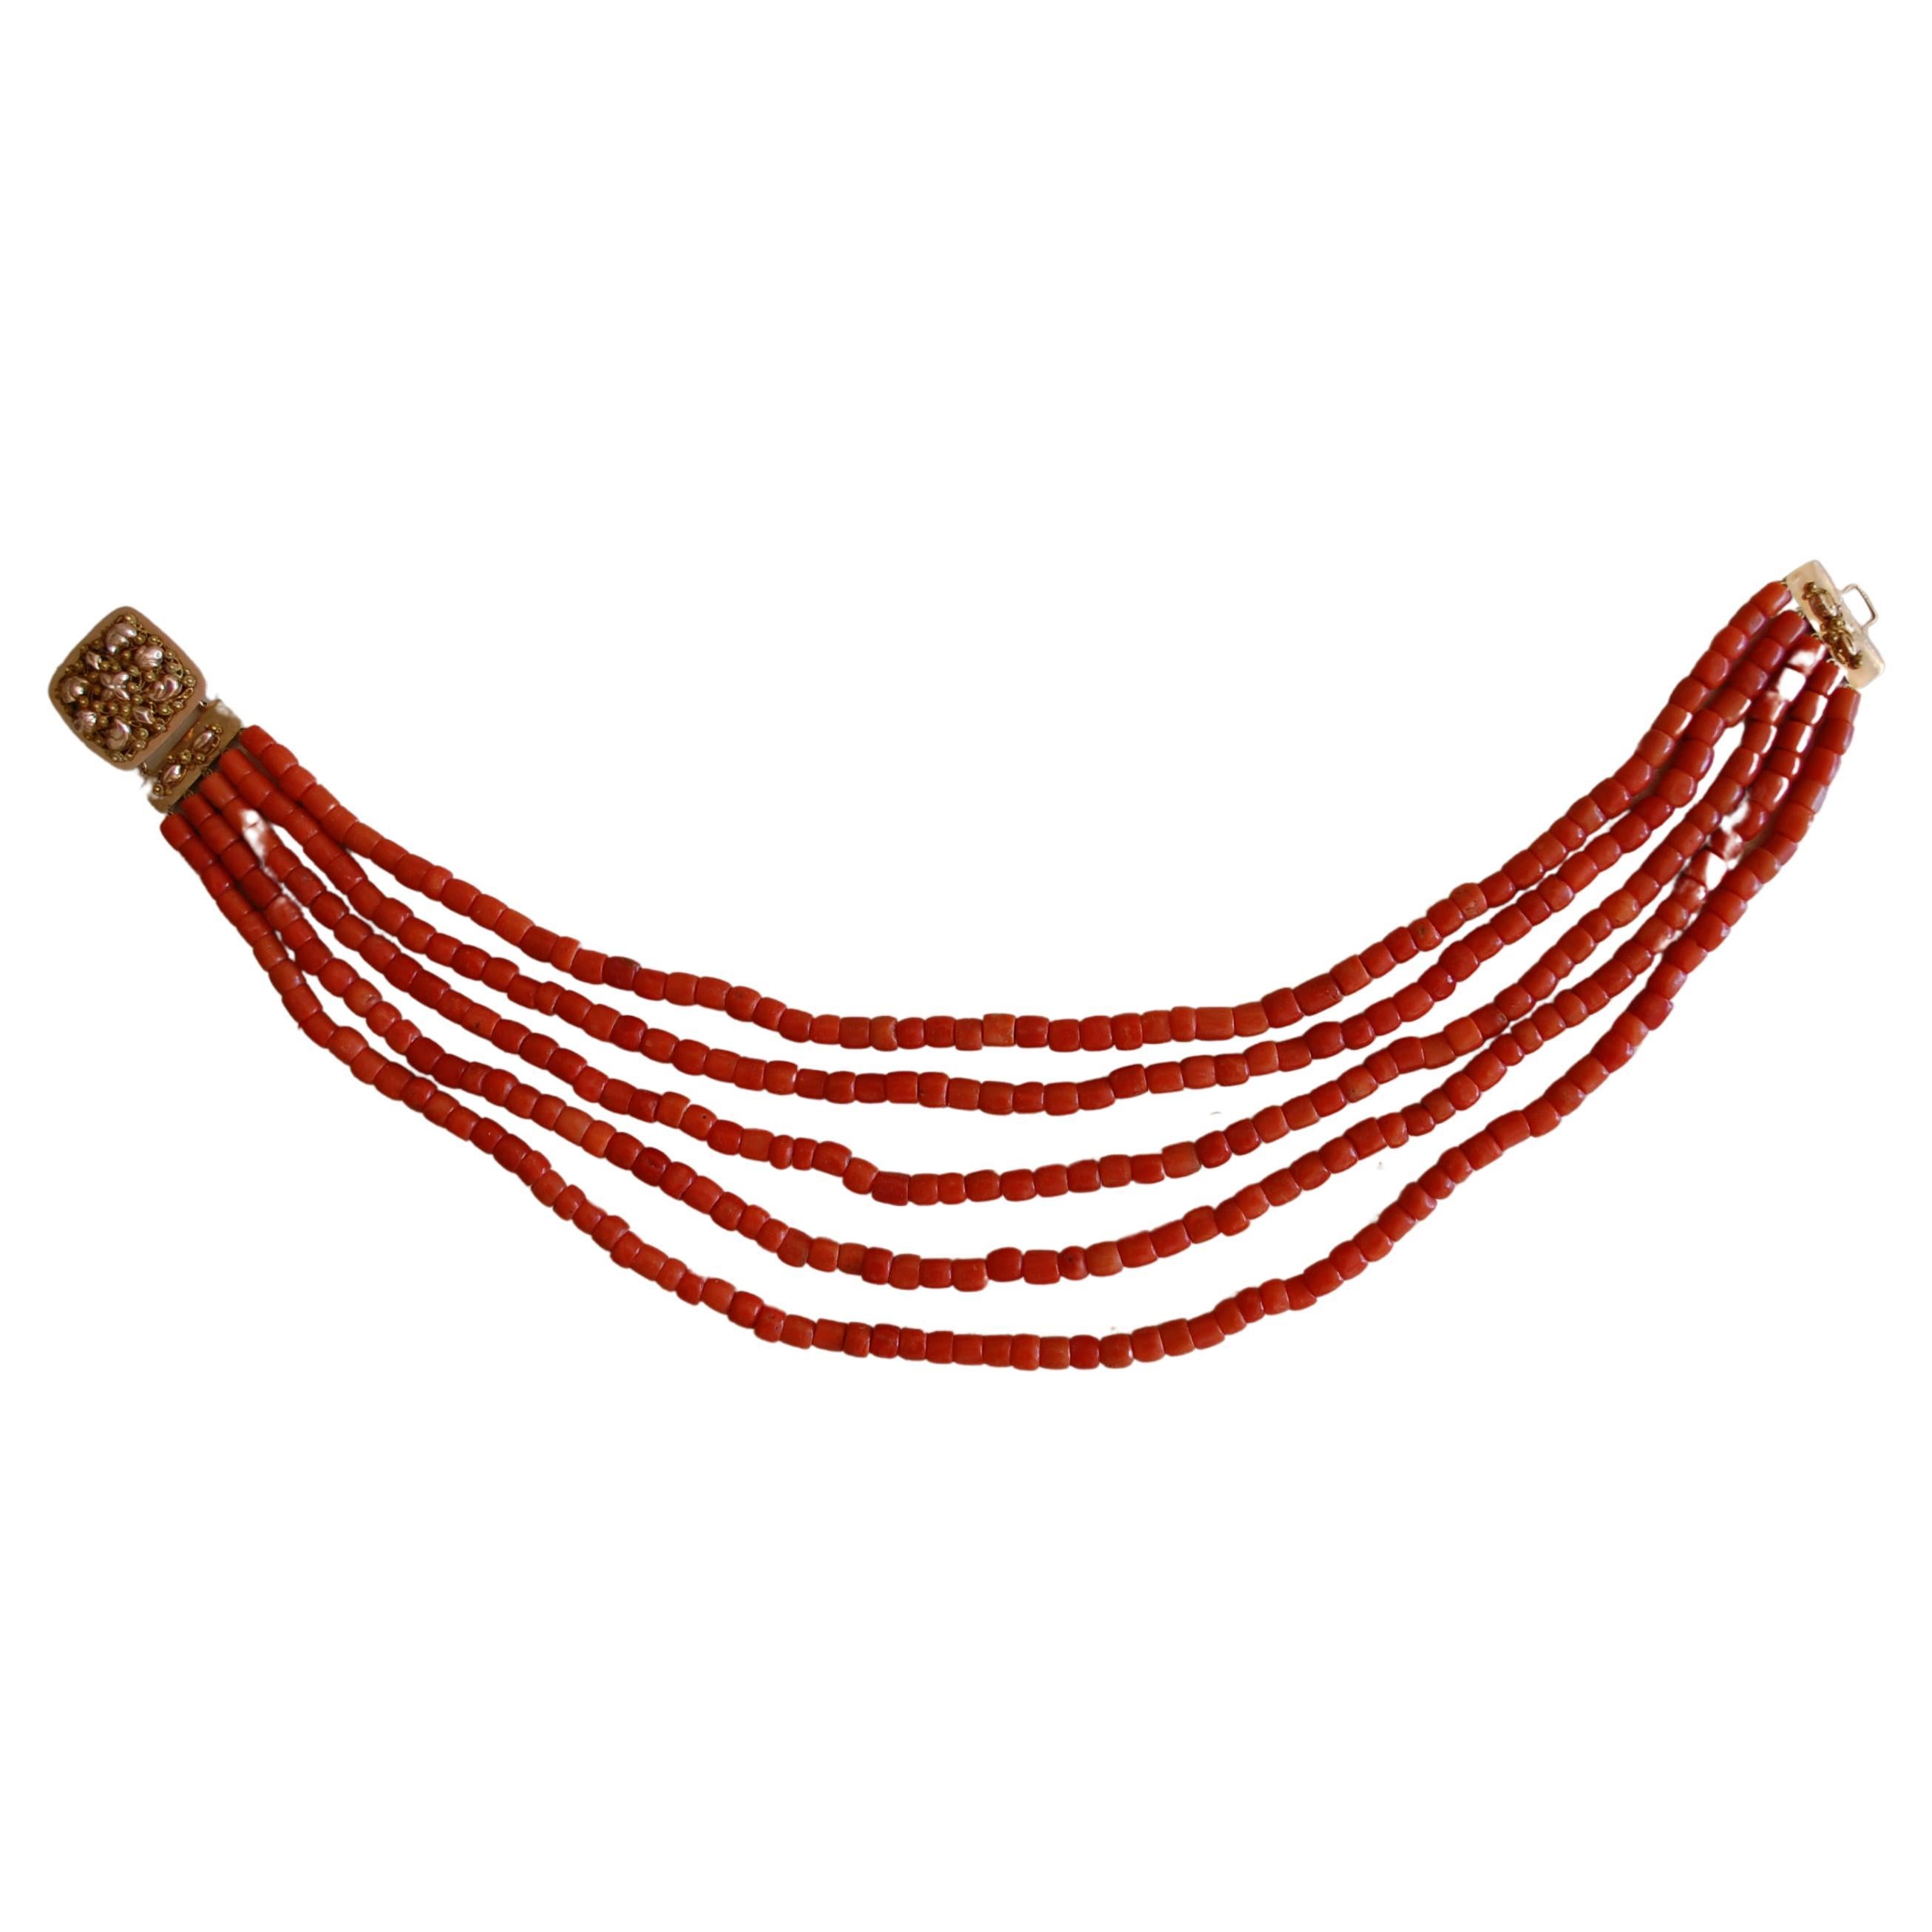 Stunning antique Coral choker necklace.
A five strand of fine European natural red/salmon coral  necklace beads about 5-6mm dimension. The coral beads are barrel-shaped and the handmade clasp is made of 14k yellow gold. The clasp is absolutely